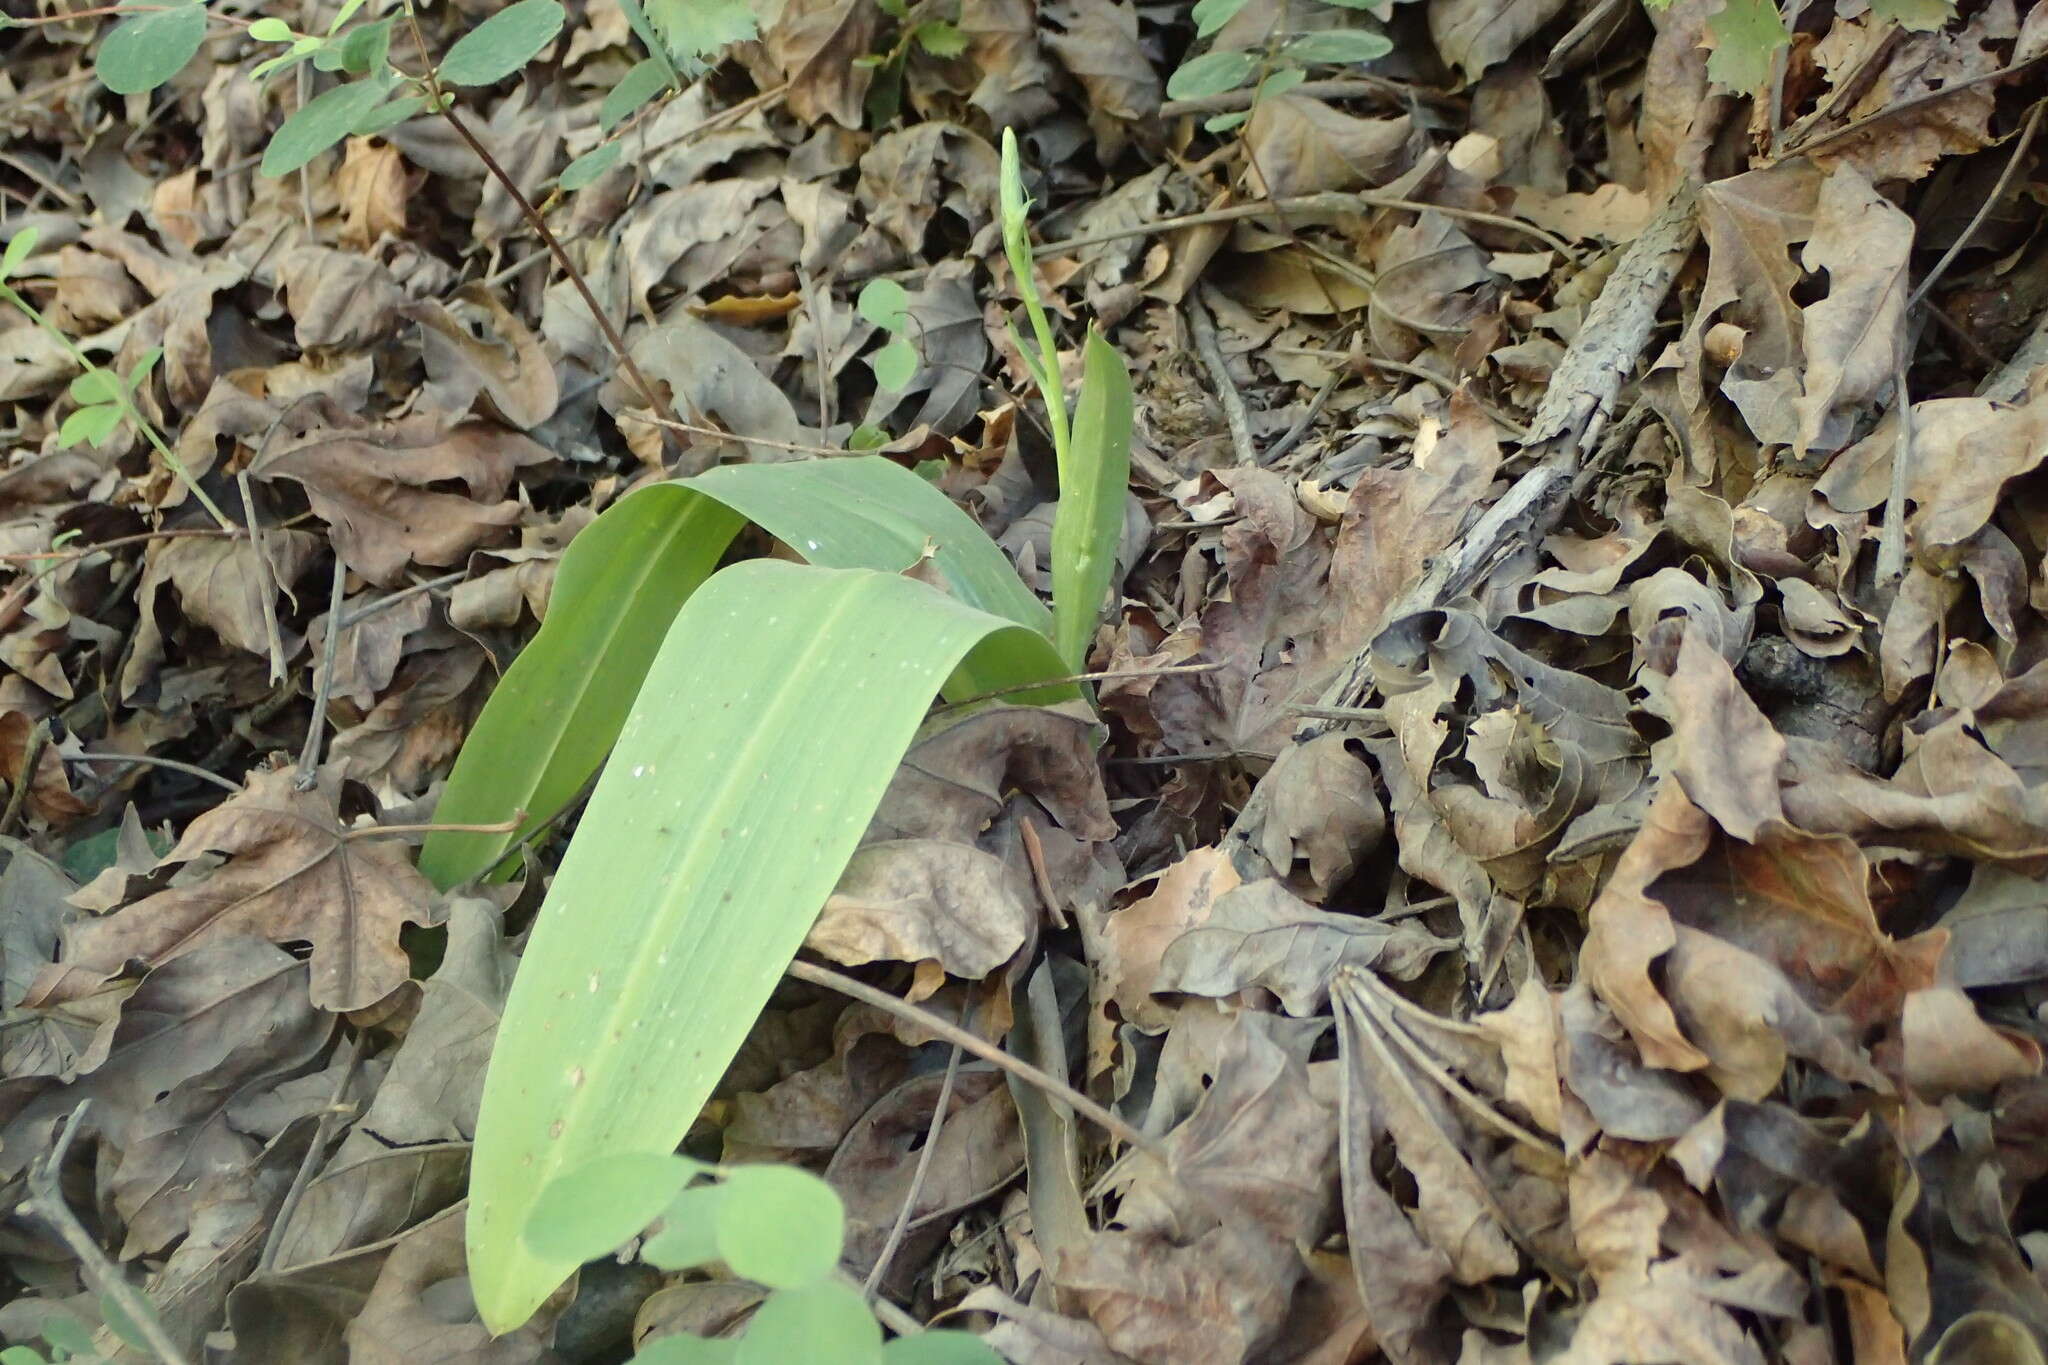 Image of Cooper's rein orchid